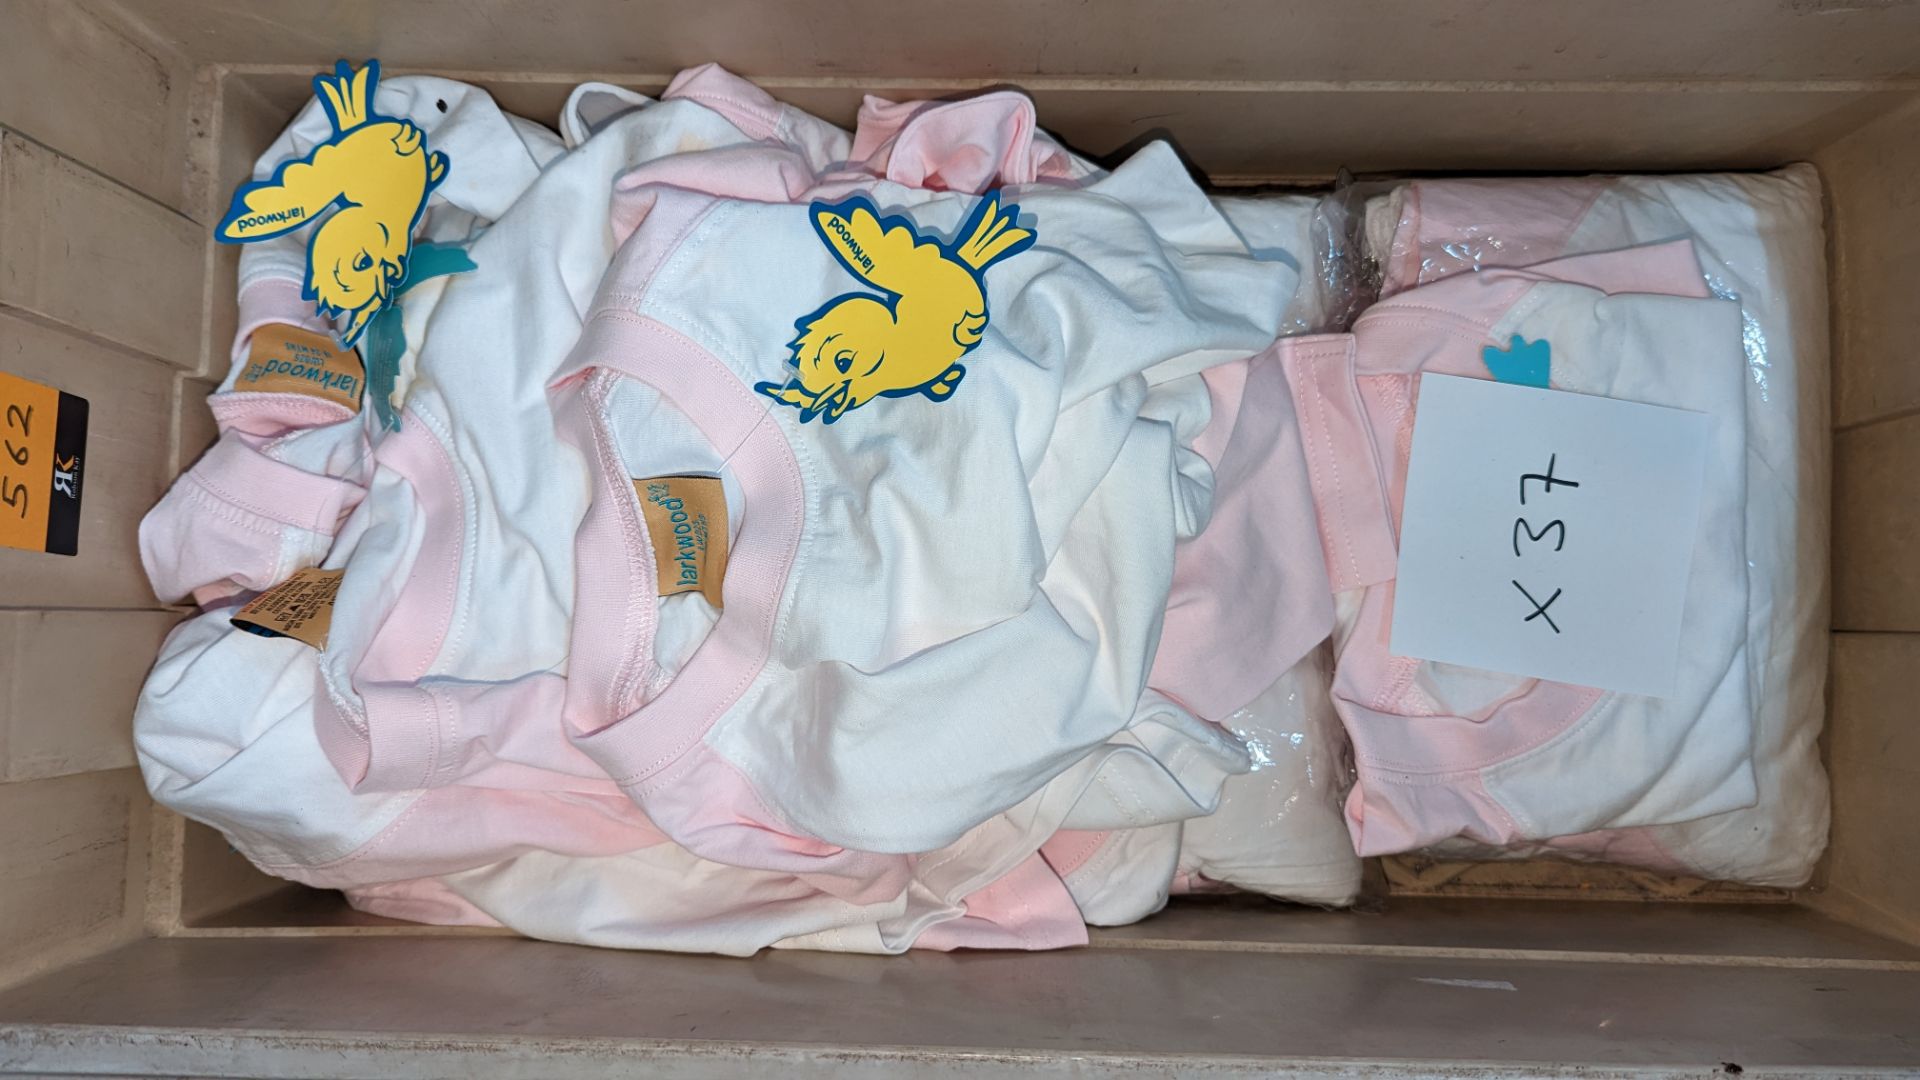 37 off Larkwood baby's long sleeve t-shirts each with white body & pink sleeves in assorted sizes - - Image 3 of 3